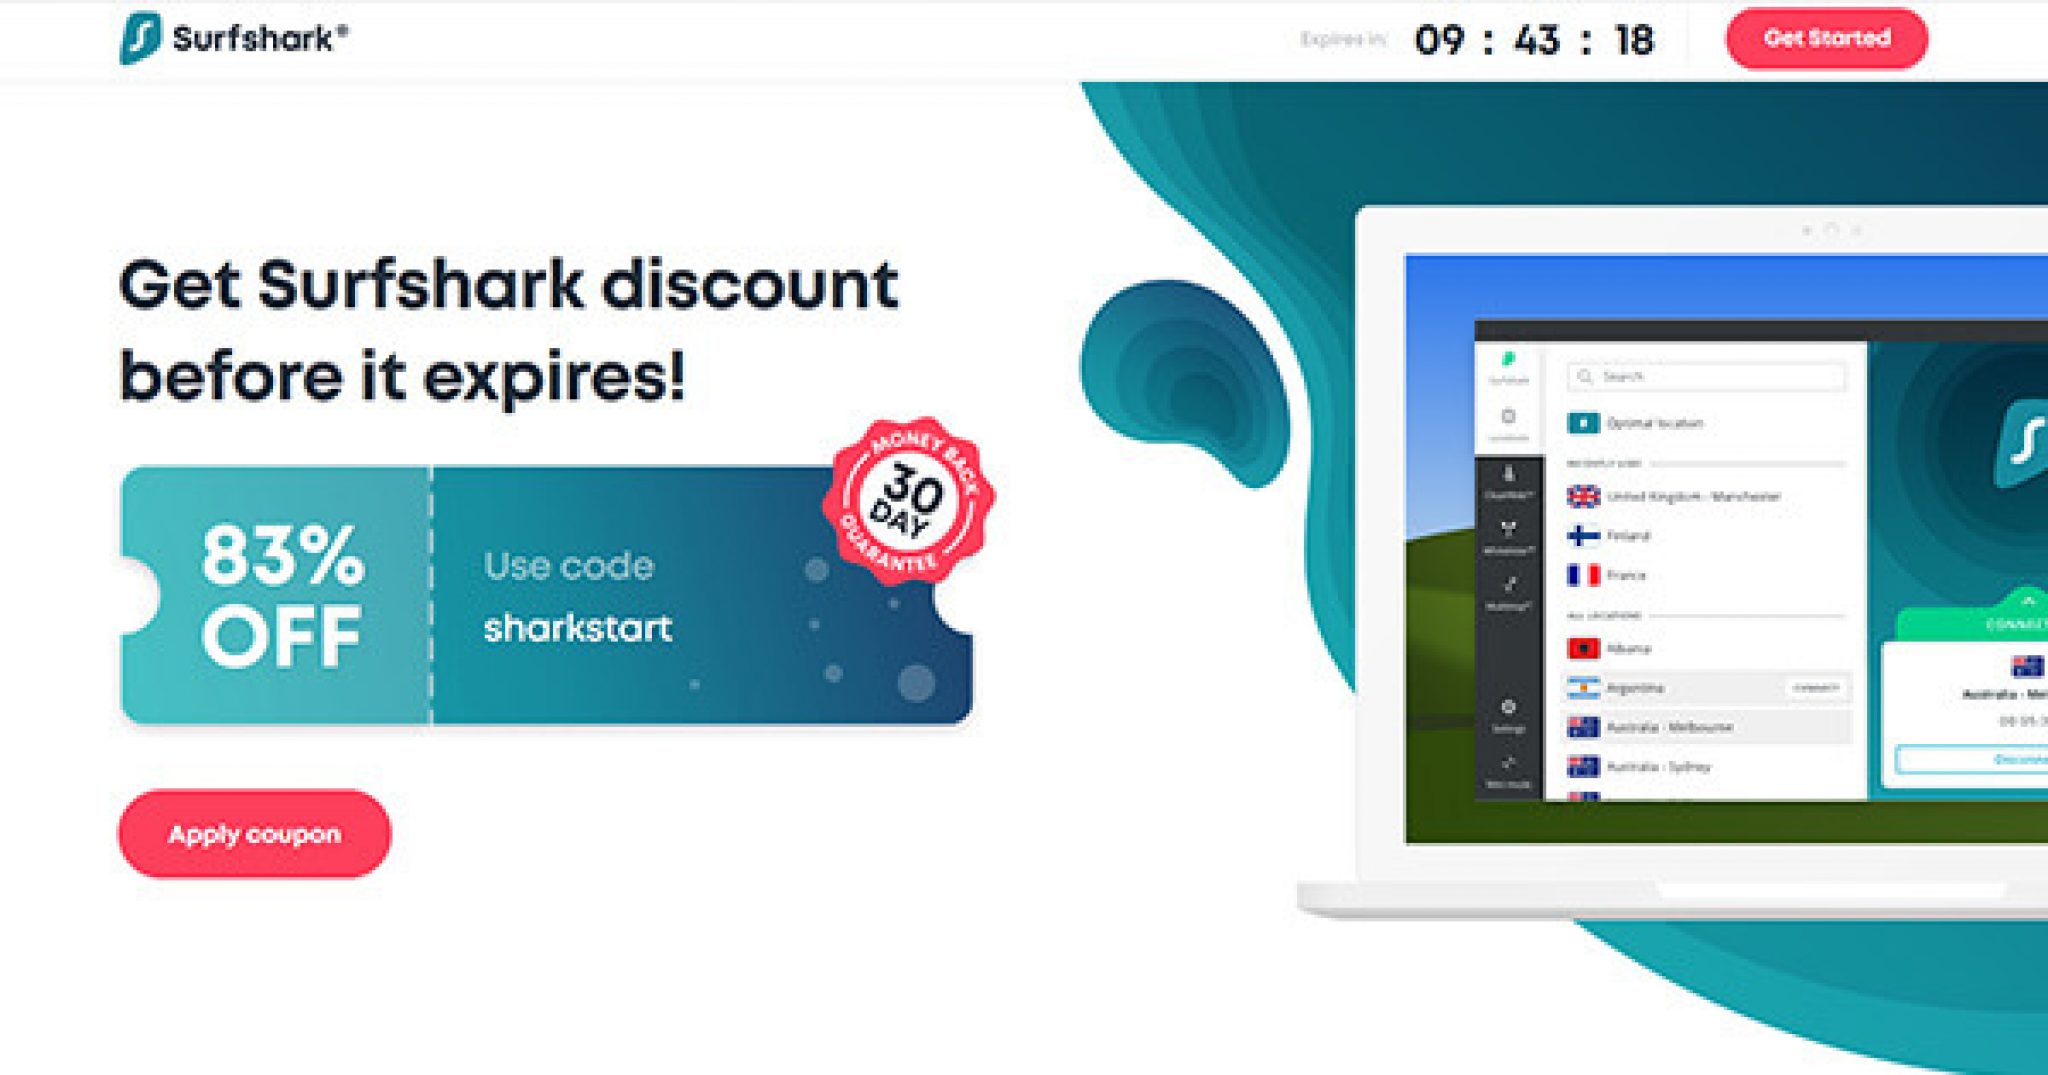 Find the Best Surfshark's Coupons and Promo Codes Now